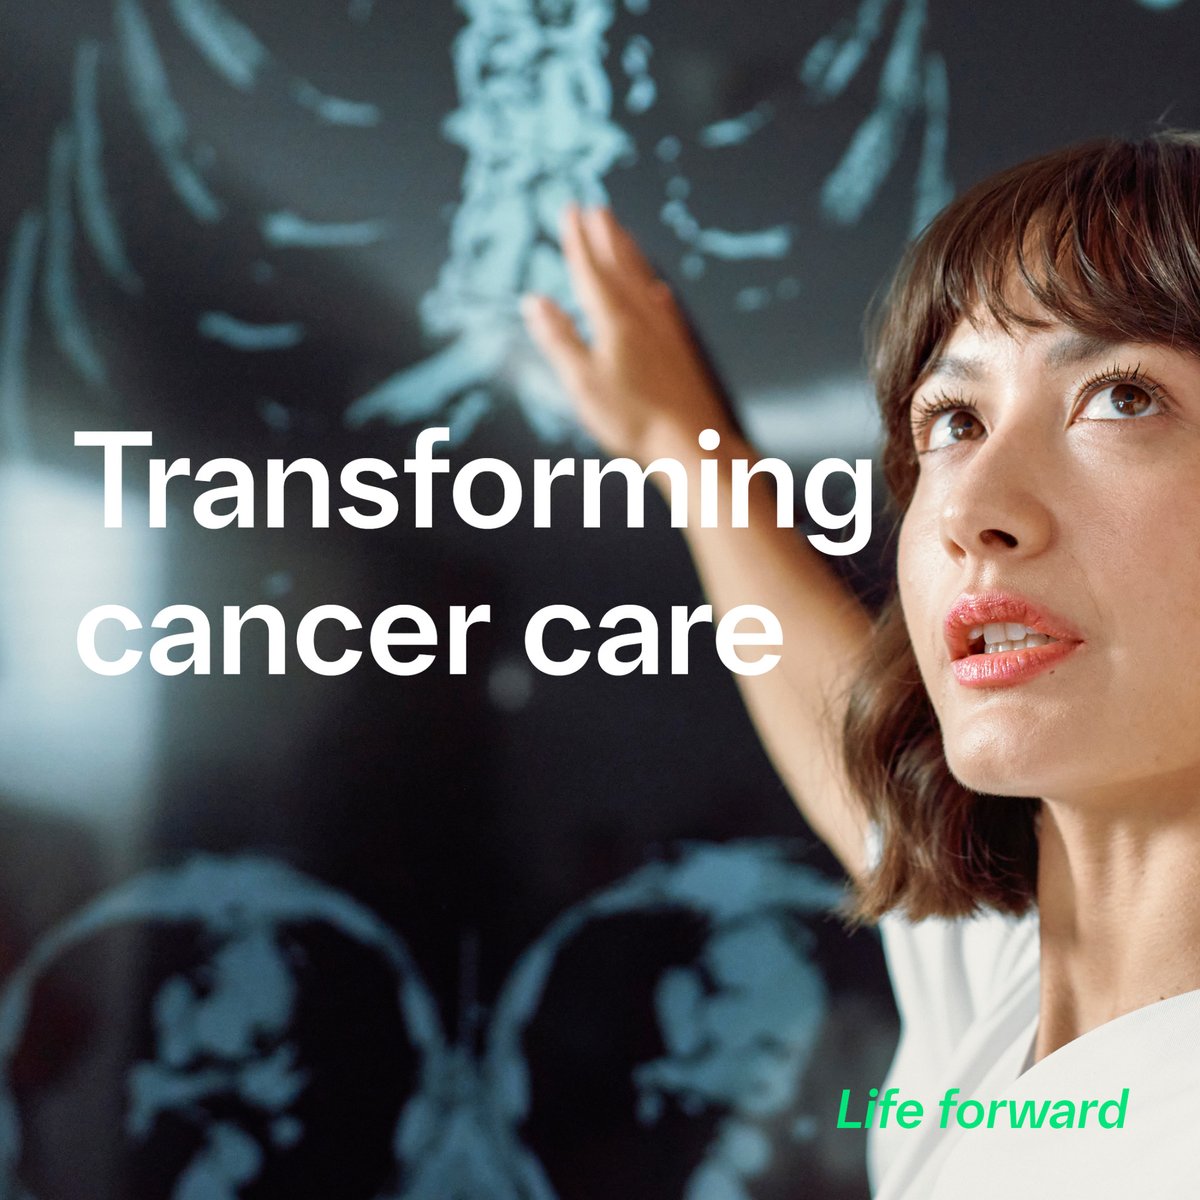 #NEWS: We are joining forces with CBmed to make the development of transformational new medicines faster and more accurate for people living with cancer. Learn more: bit.ly/3HR9yZv #ResearchCollaboration #Cancer #TranslationalMedicine